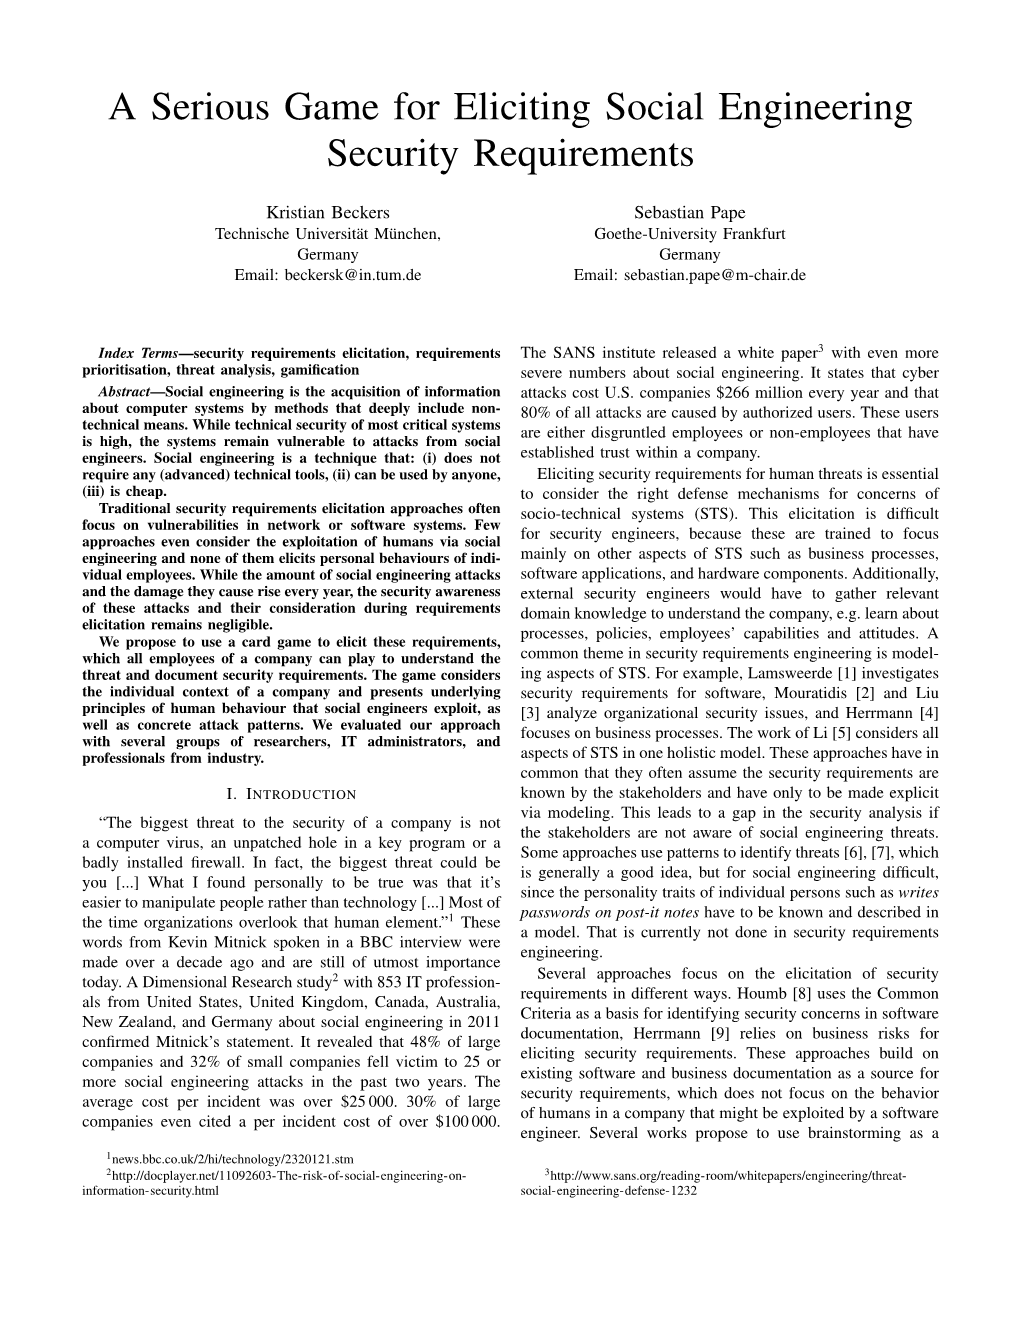 A Serious Game for Eliciting Social Engineering Security Requirements